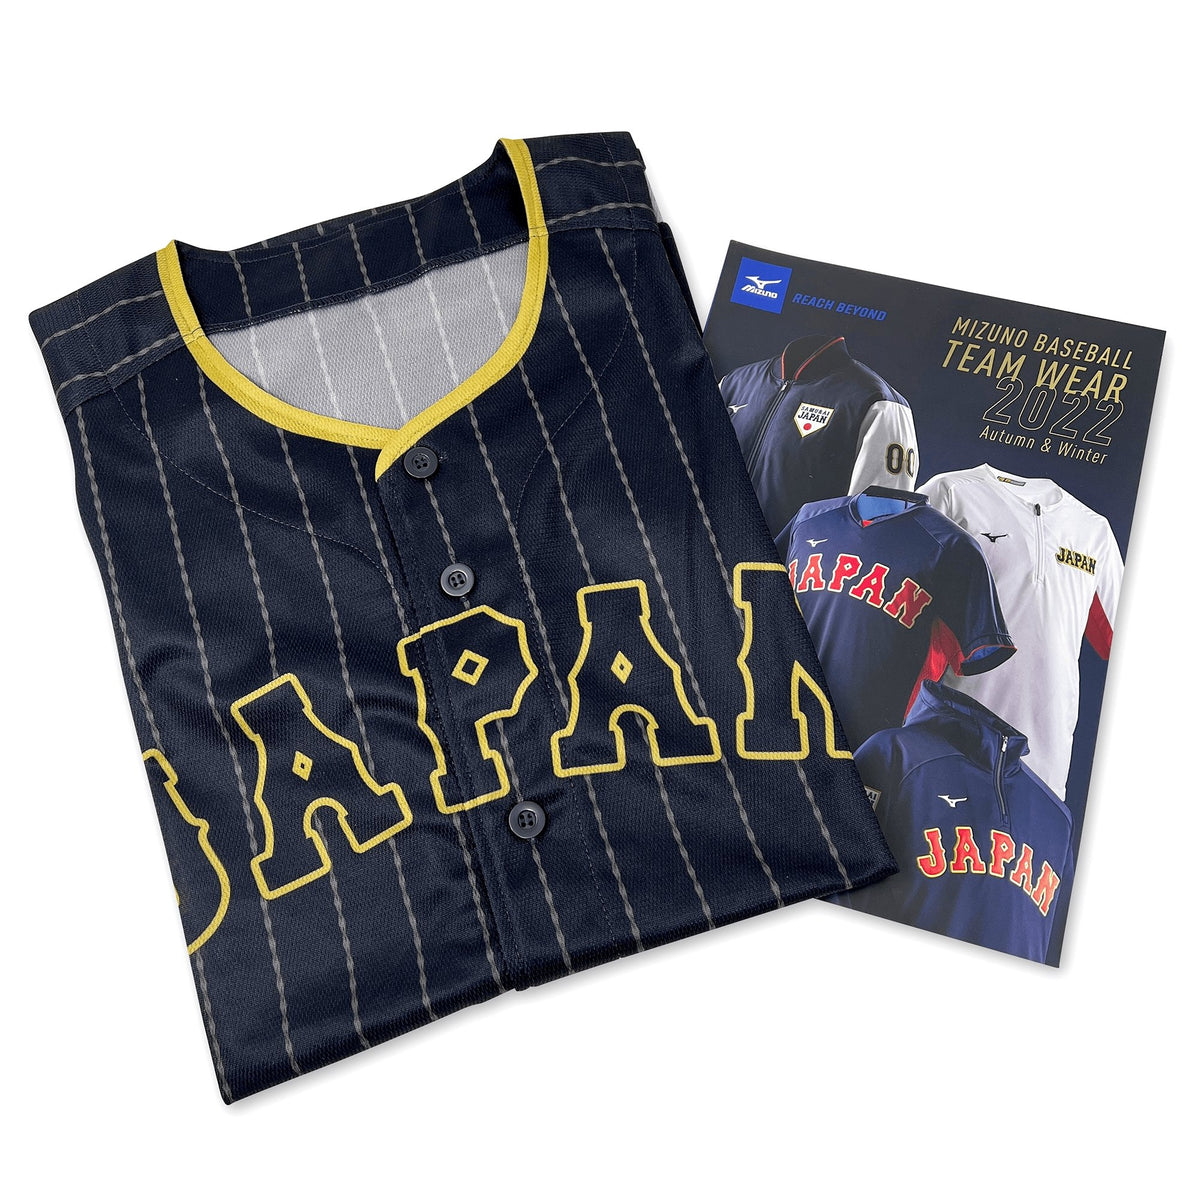 Sold at Auction: Shohei Ohtani Signed Japanese Jersey